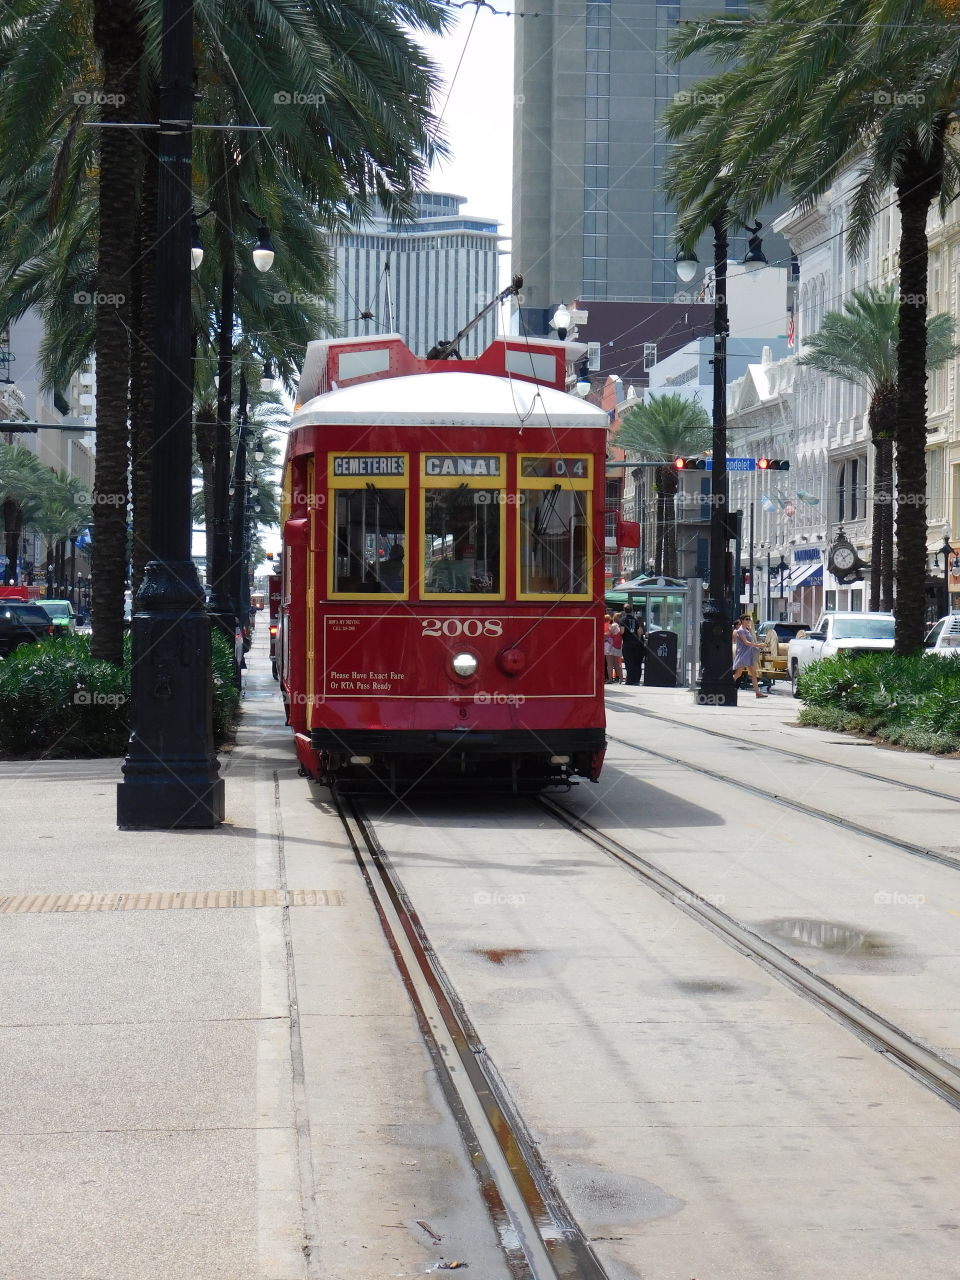 The New Orleans street car